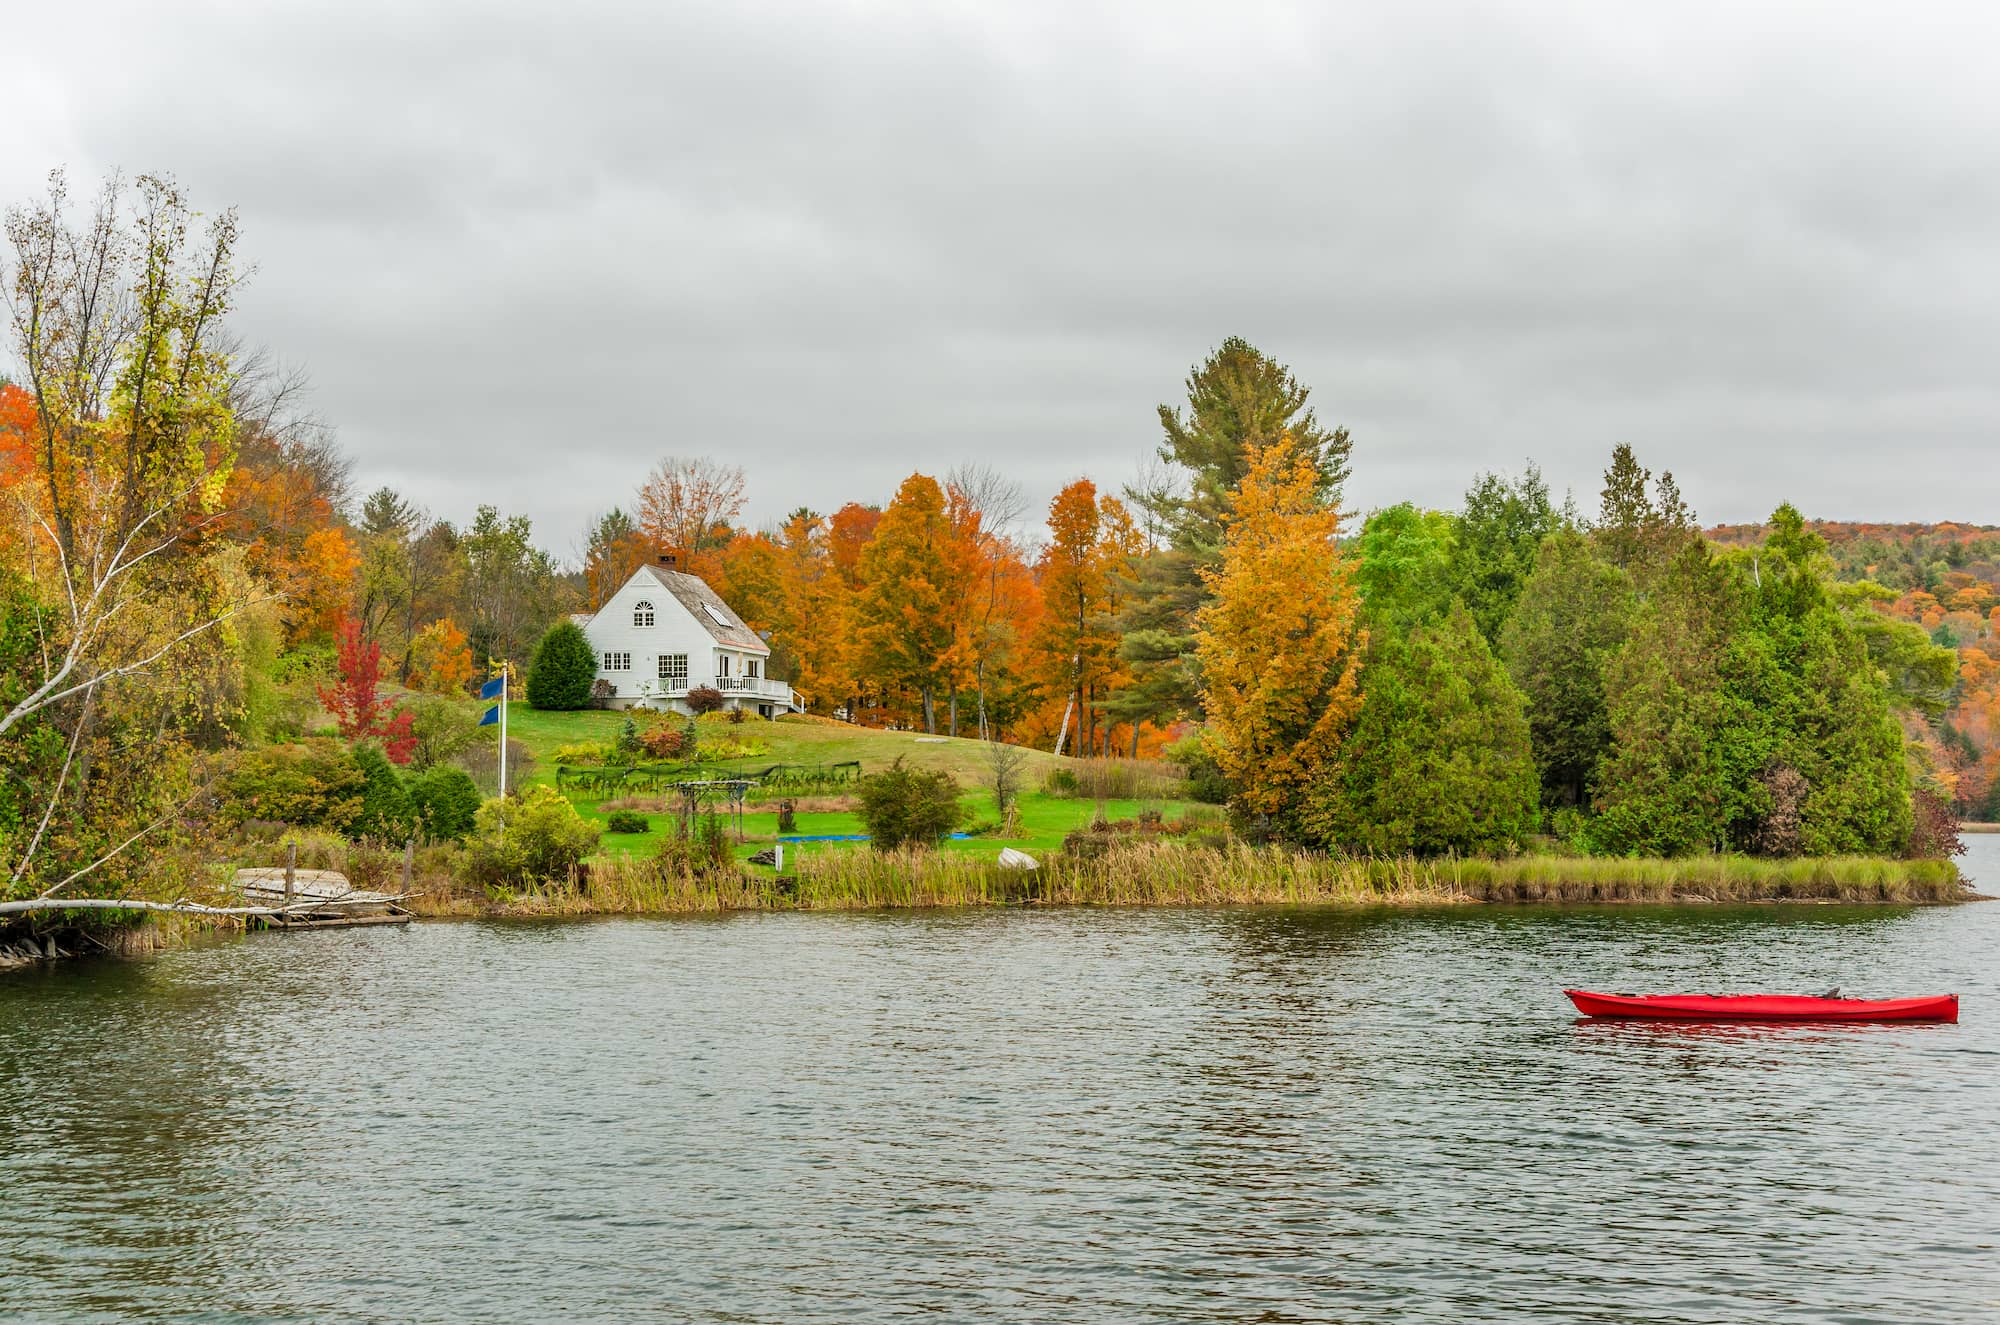 Panoramic view of fall trees, a lake, and a red canoe on the water.